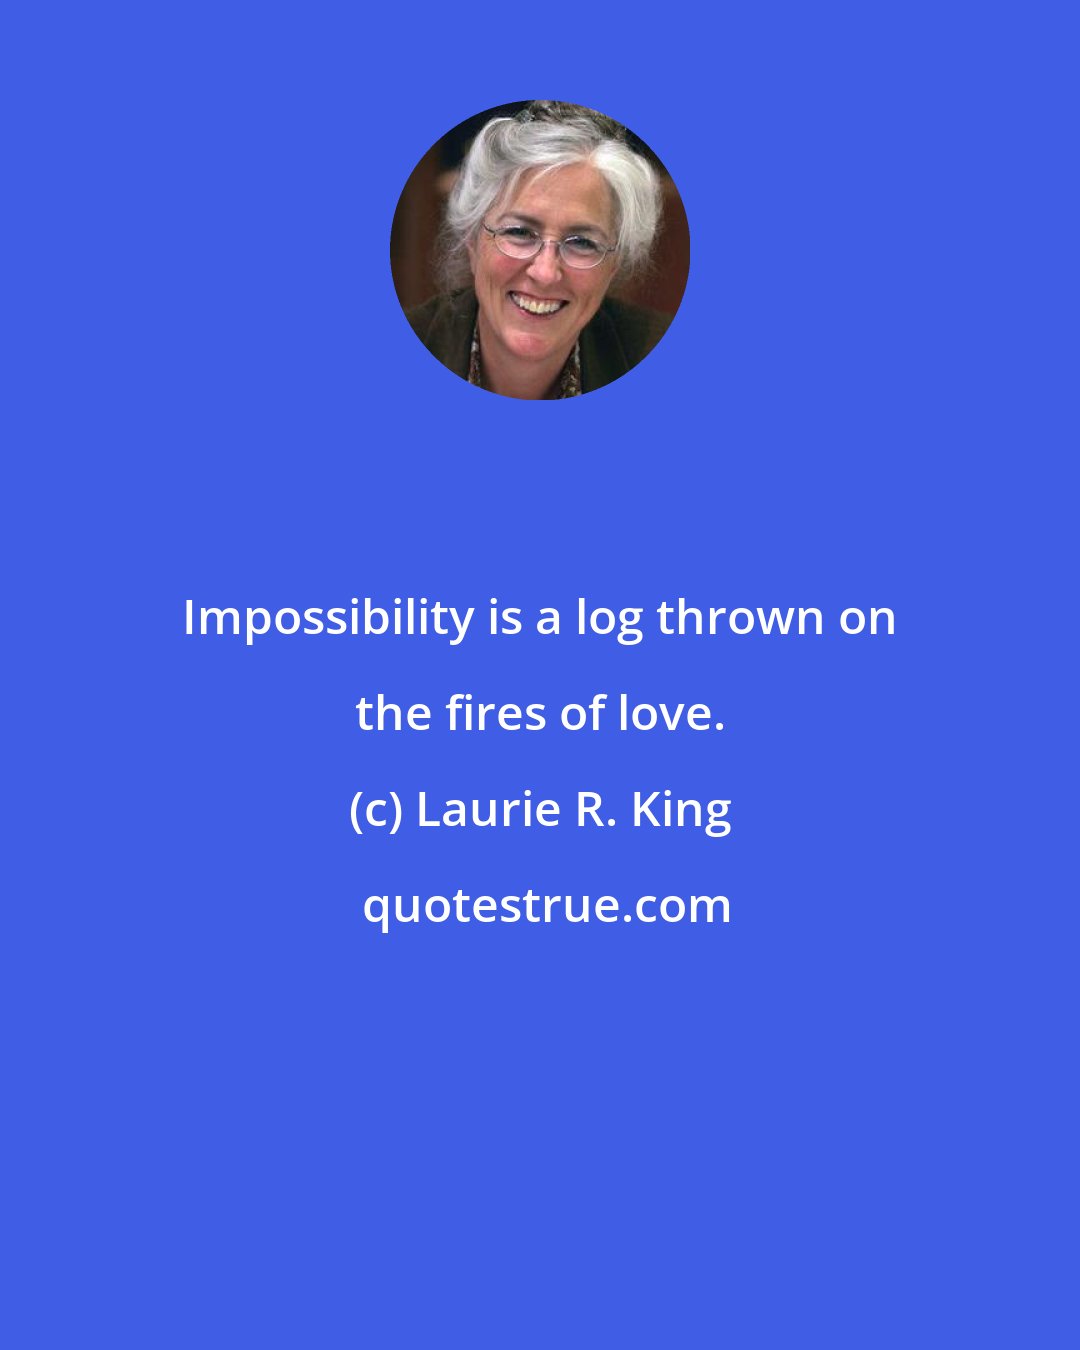 Laurie R. King: Impossibility is a log thrown on the fires of love.